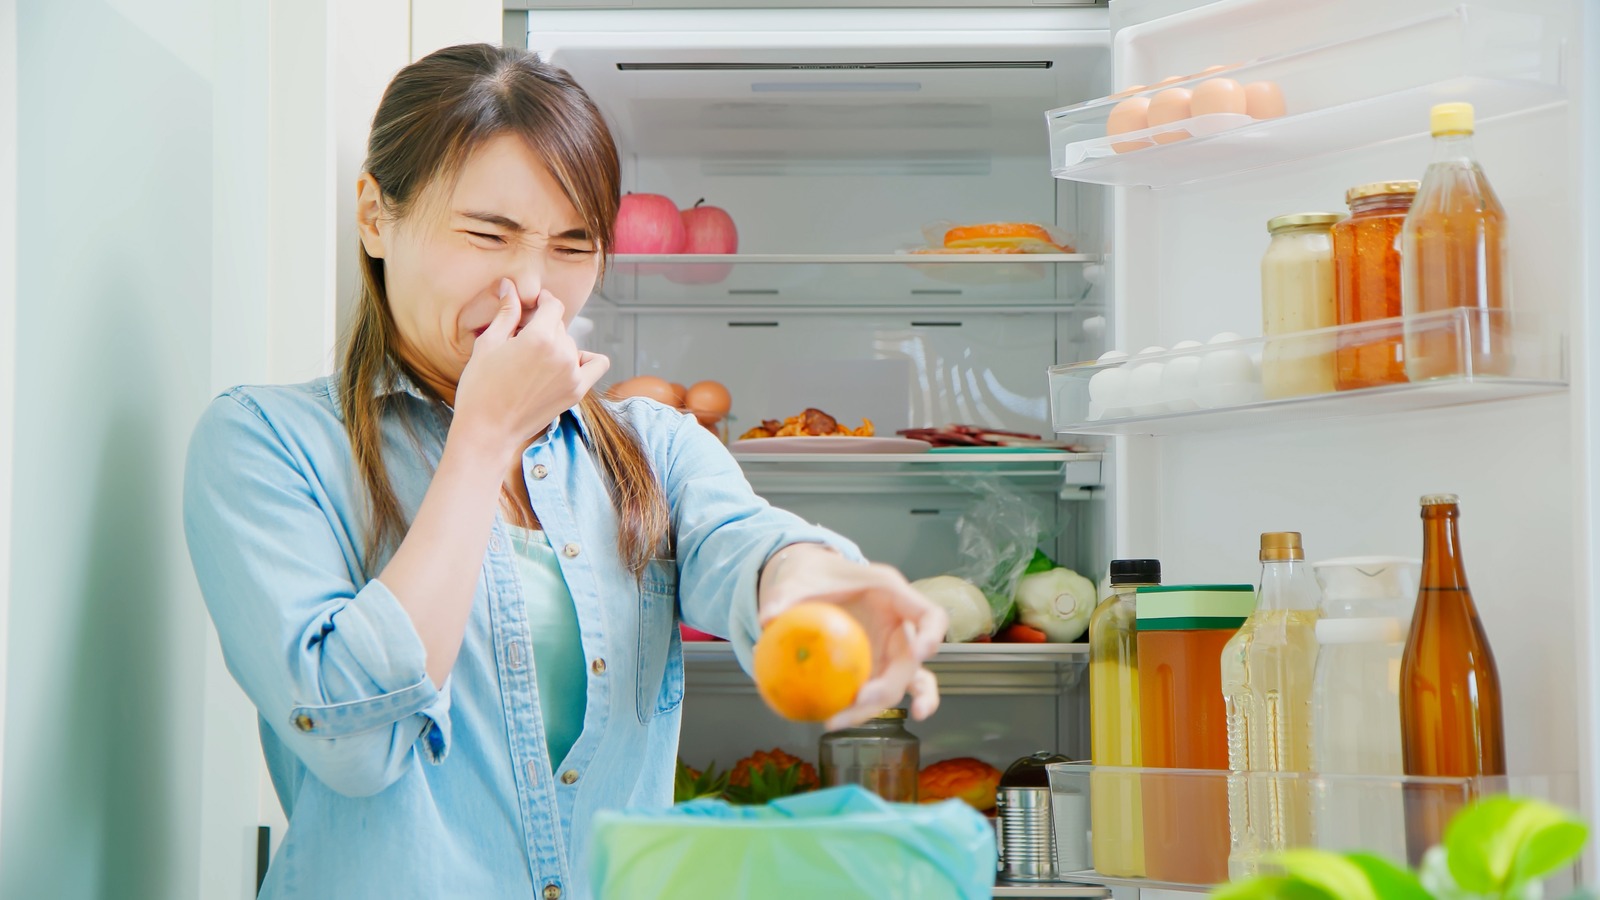 https://www.housedigest.com/img/gallery/what-to-do-if-you-find-mold-in-your-fridge/l-intro-1691012788.jpg